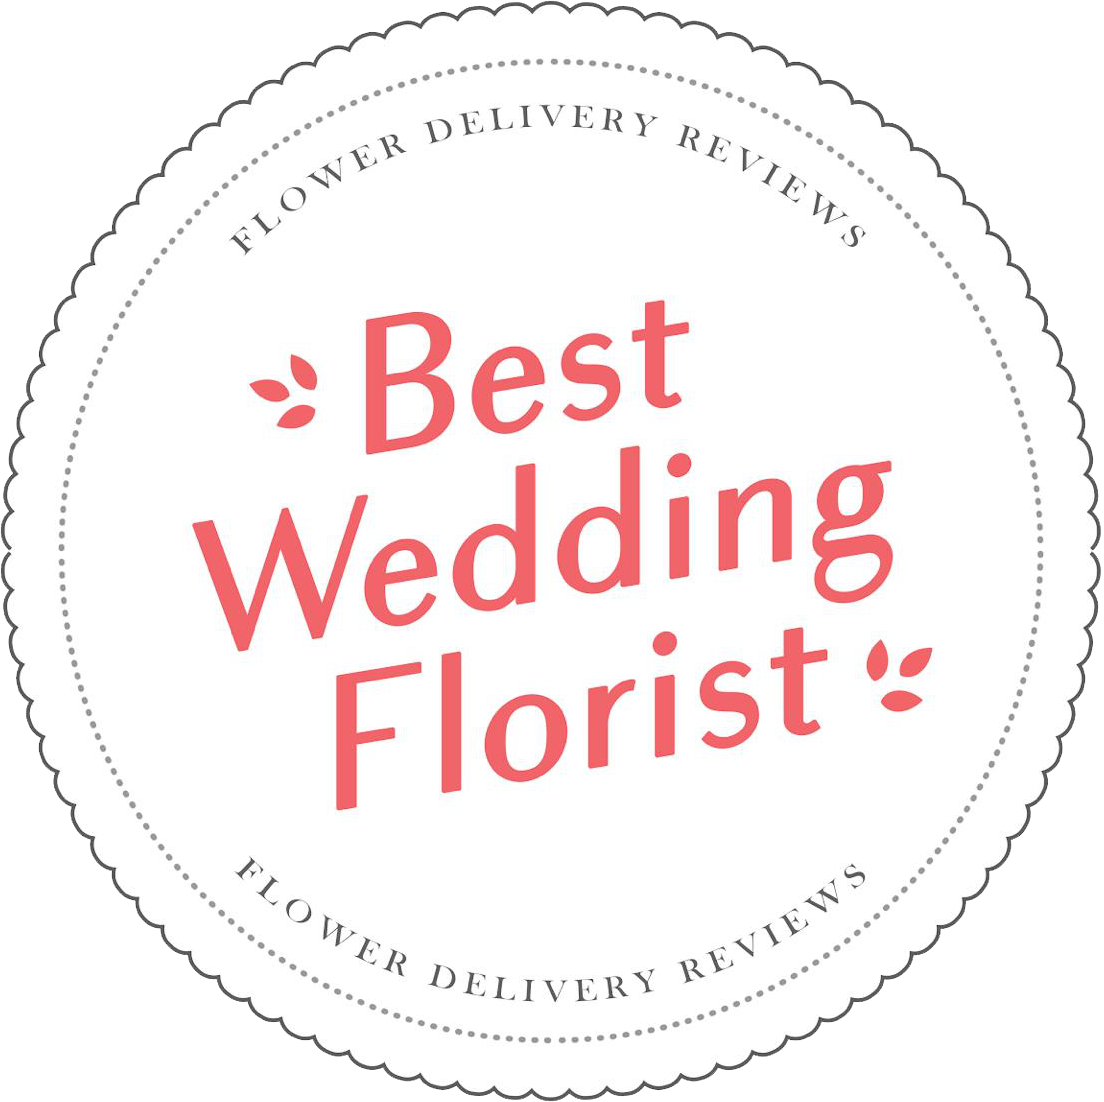 The Flower Delivery Review Badge 2019